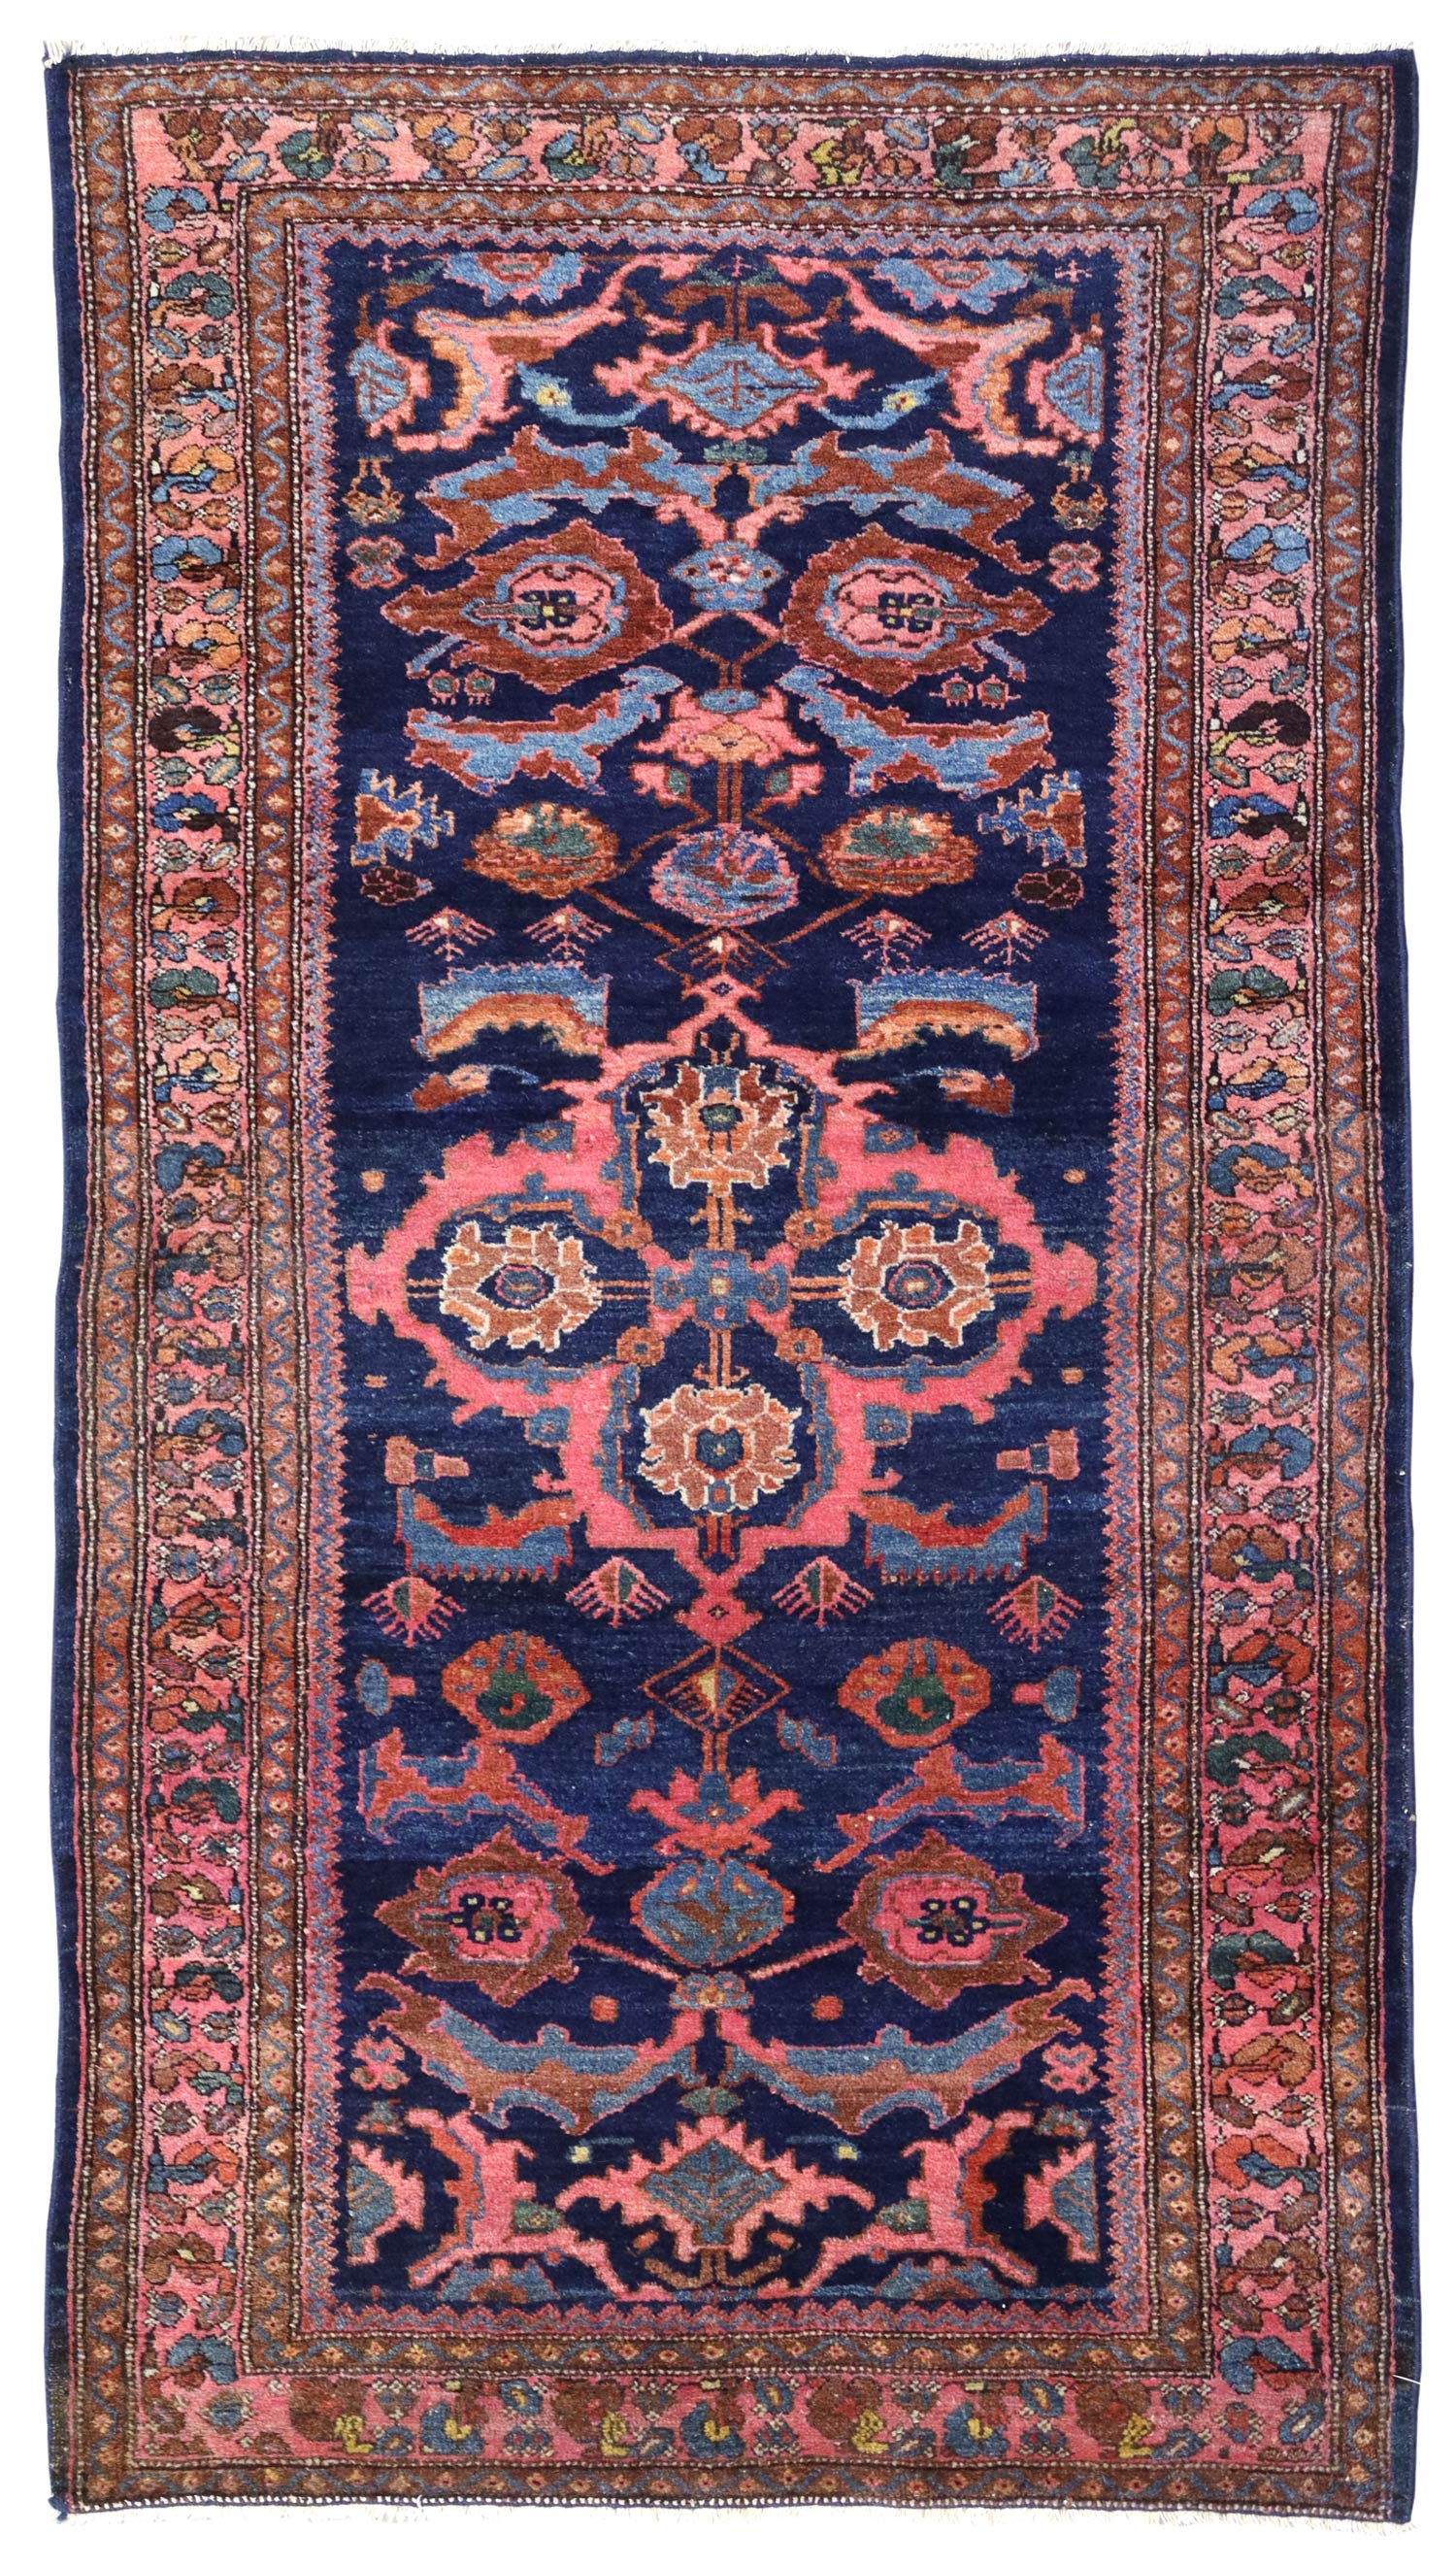 Antique Lilhan Handwoven Tribal Rug